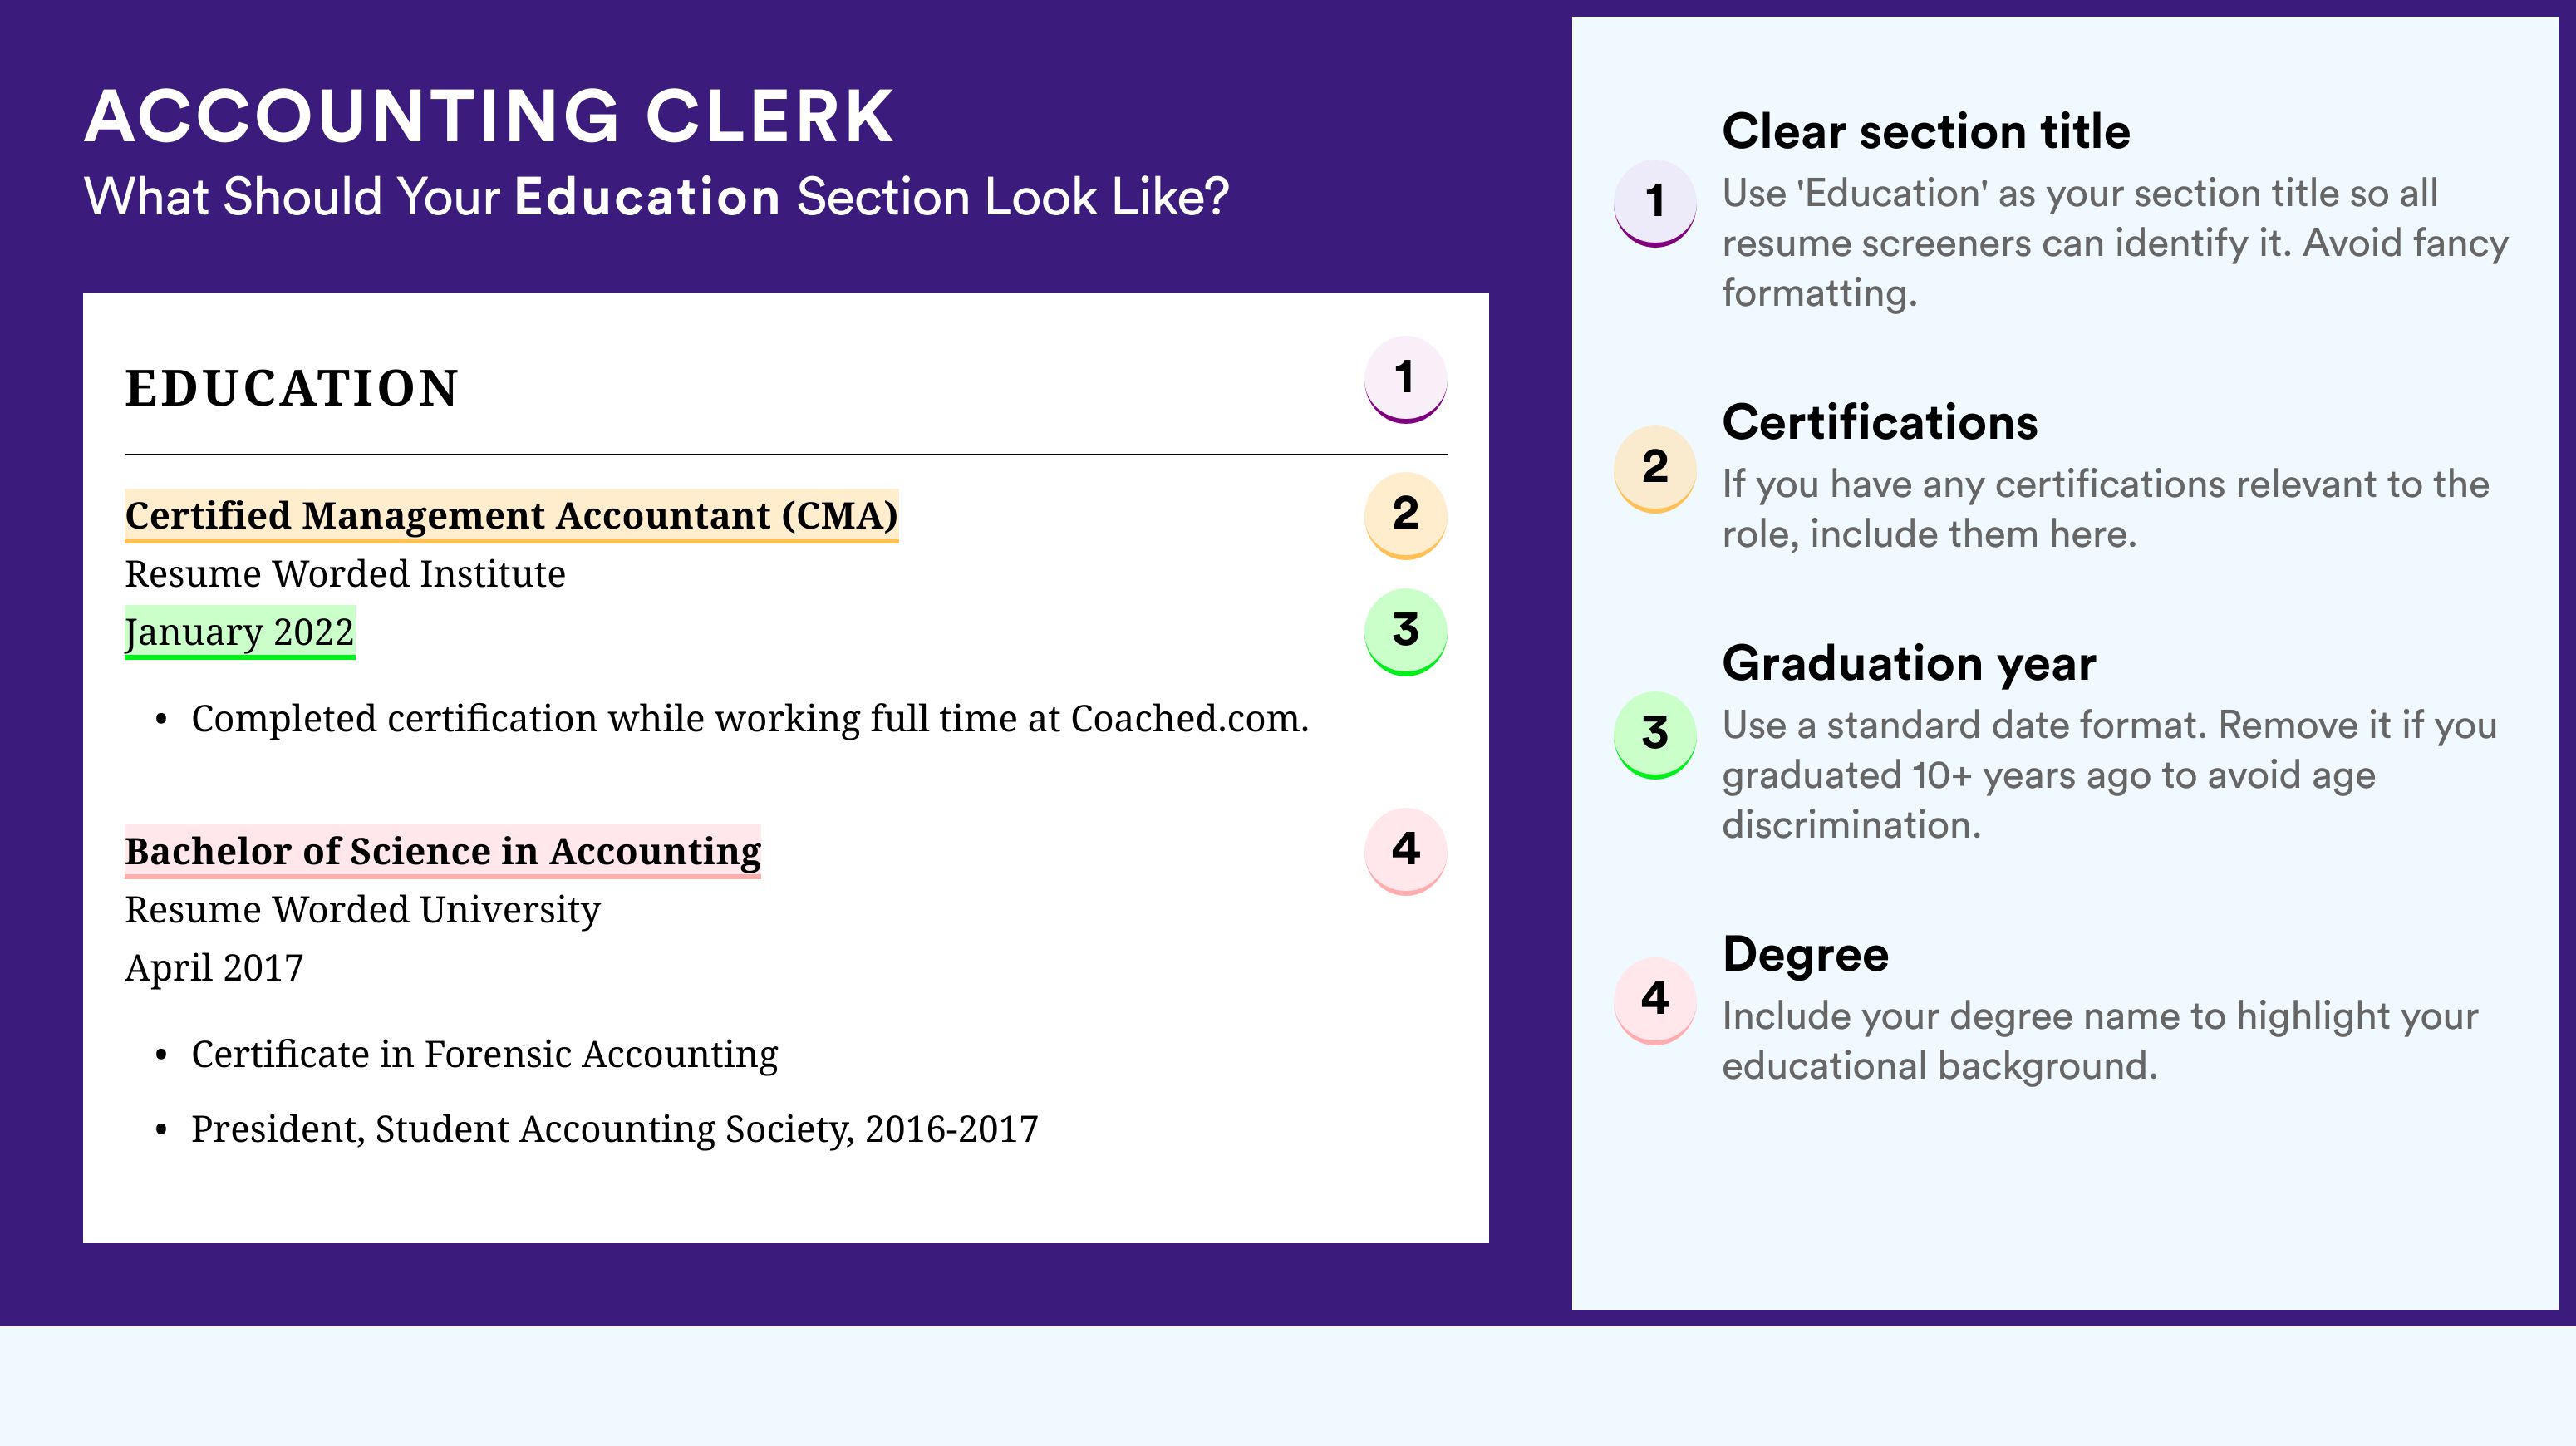 How To Write An Education Section - Accounting Clerk Roles